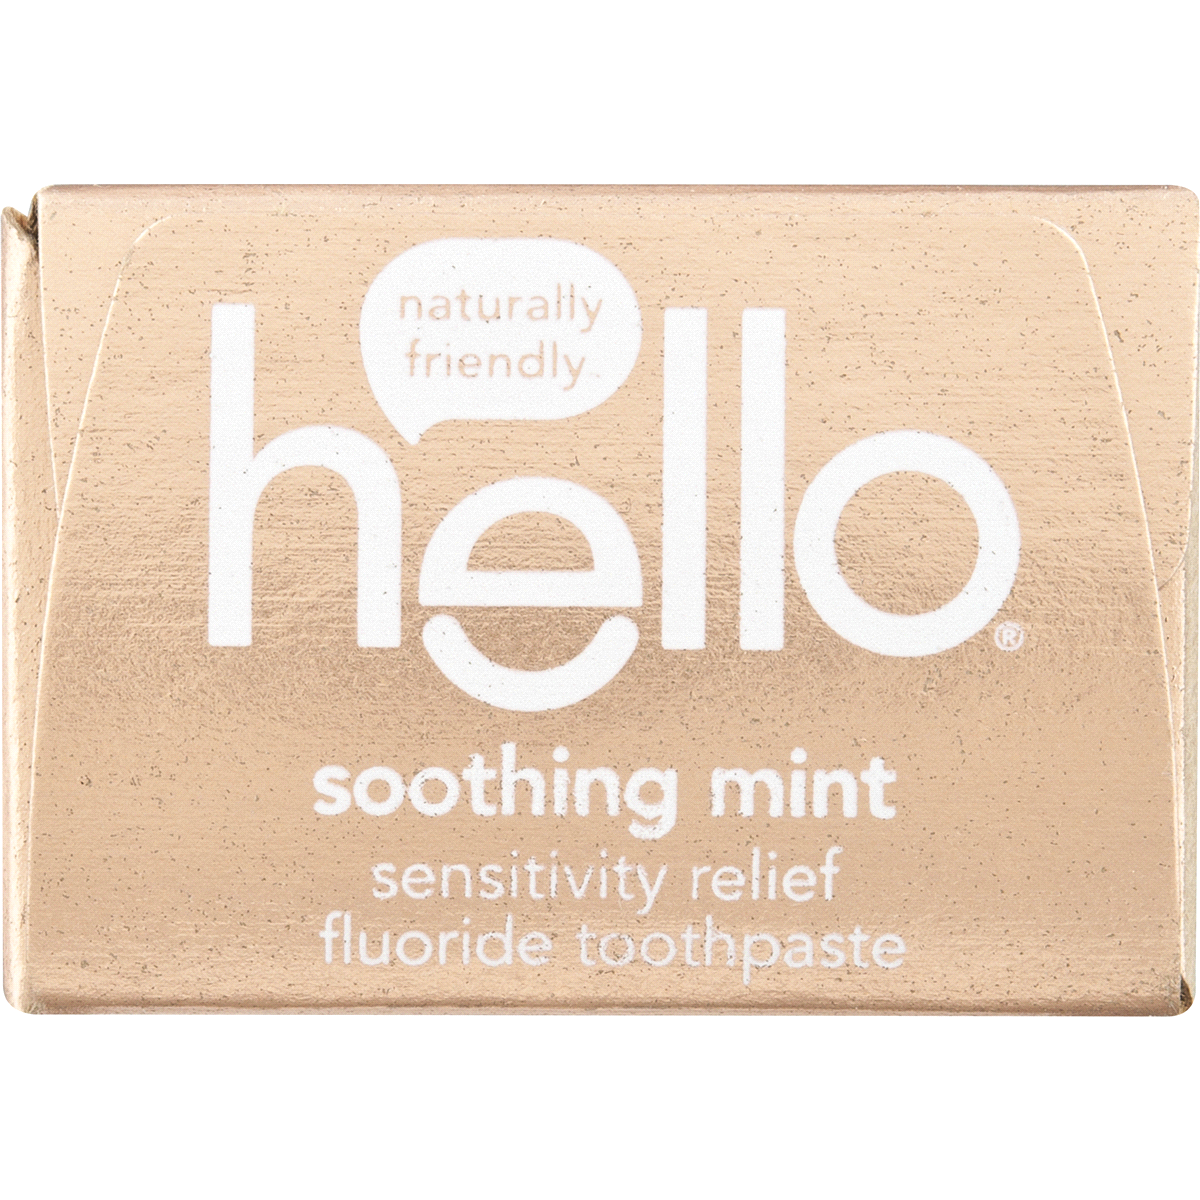 slide 4 of 10, Hello Sensitivity Relief Soothing Mint Fluoride Toothpaste, 4 oz